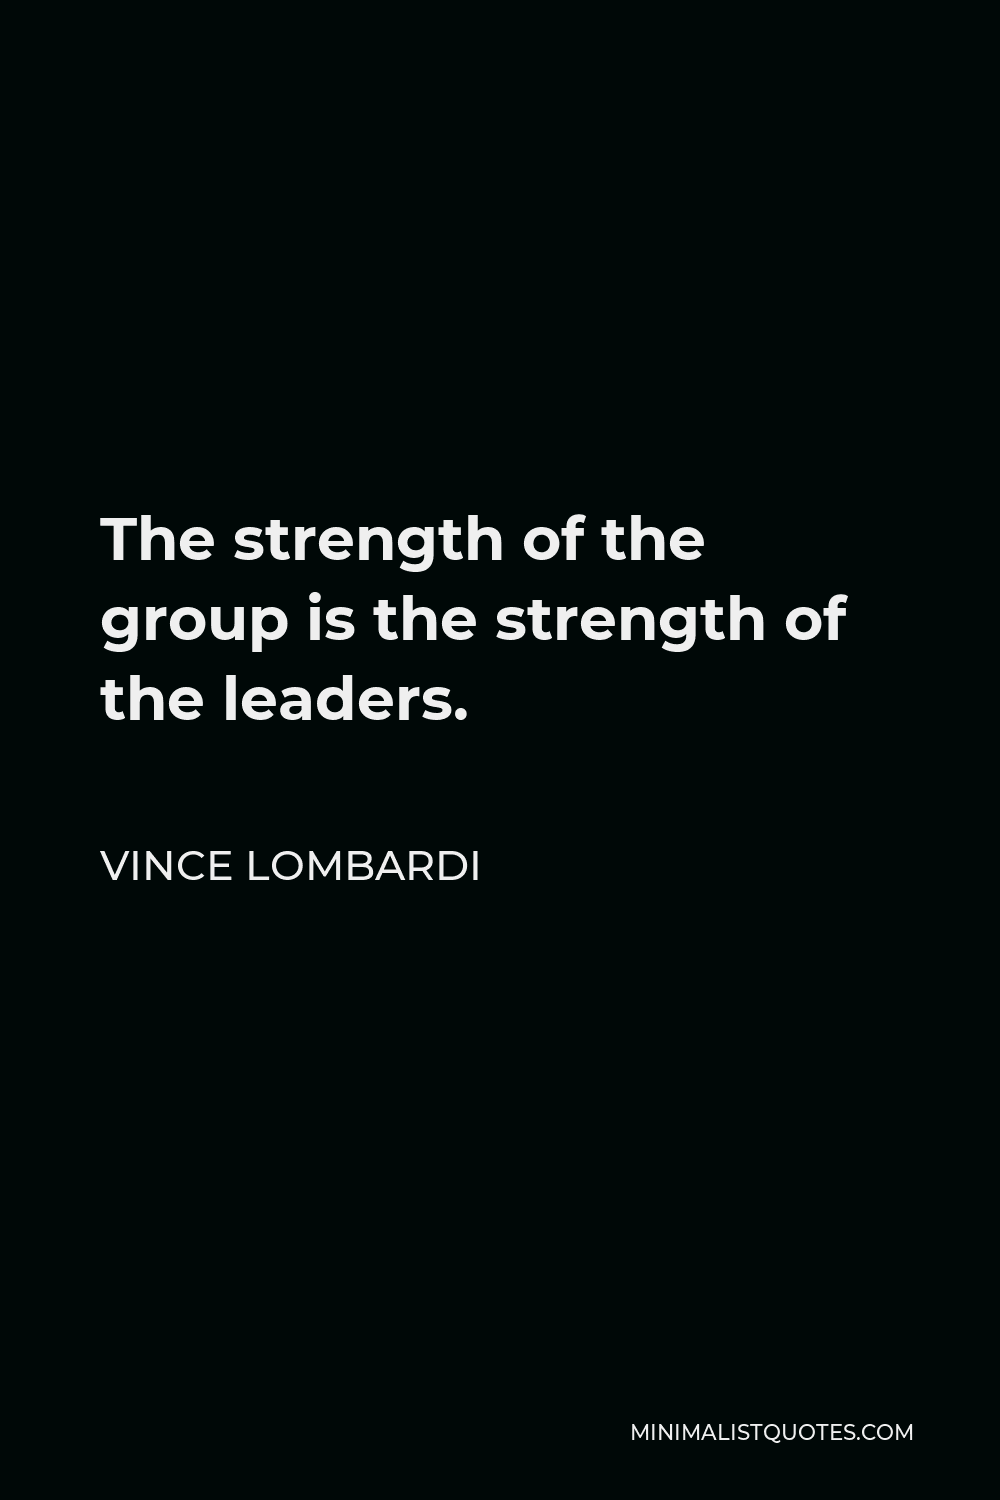 Vince Lombardi Quote - The strength of the group is the strength of the leaders.